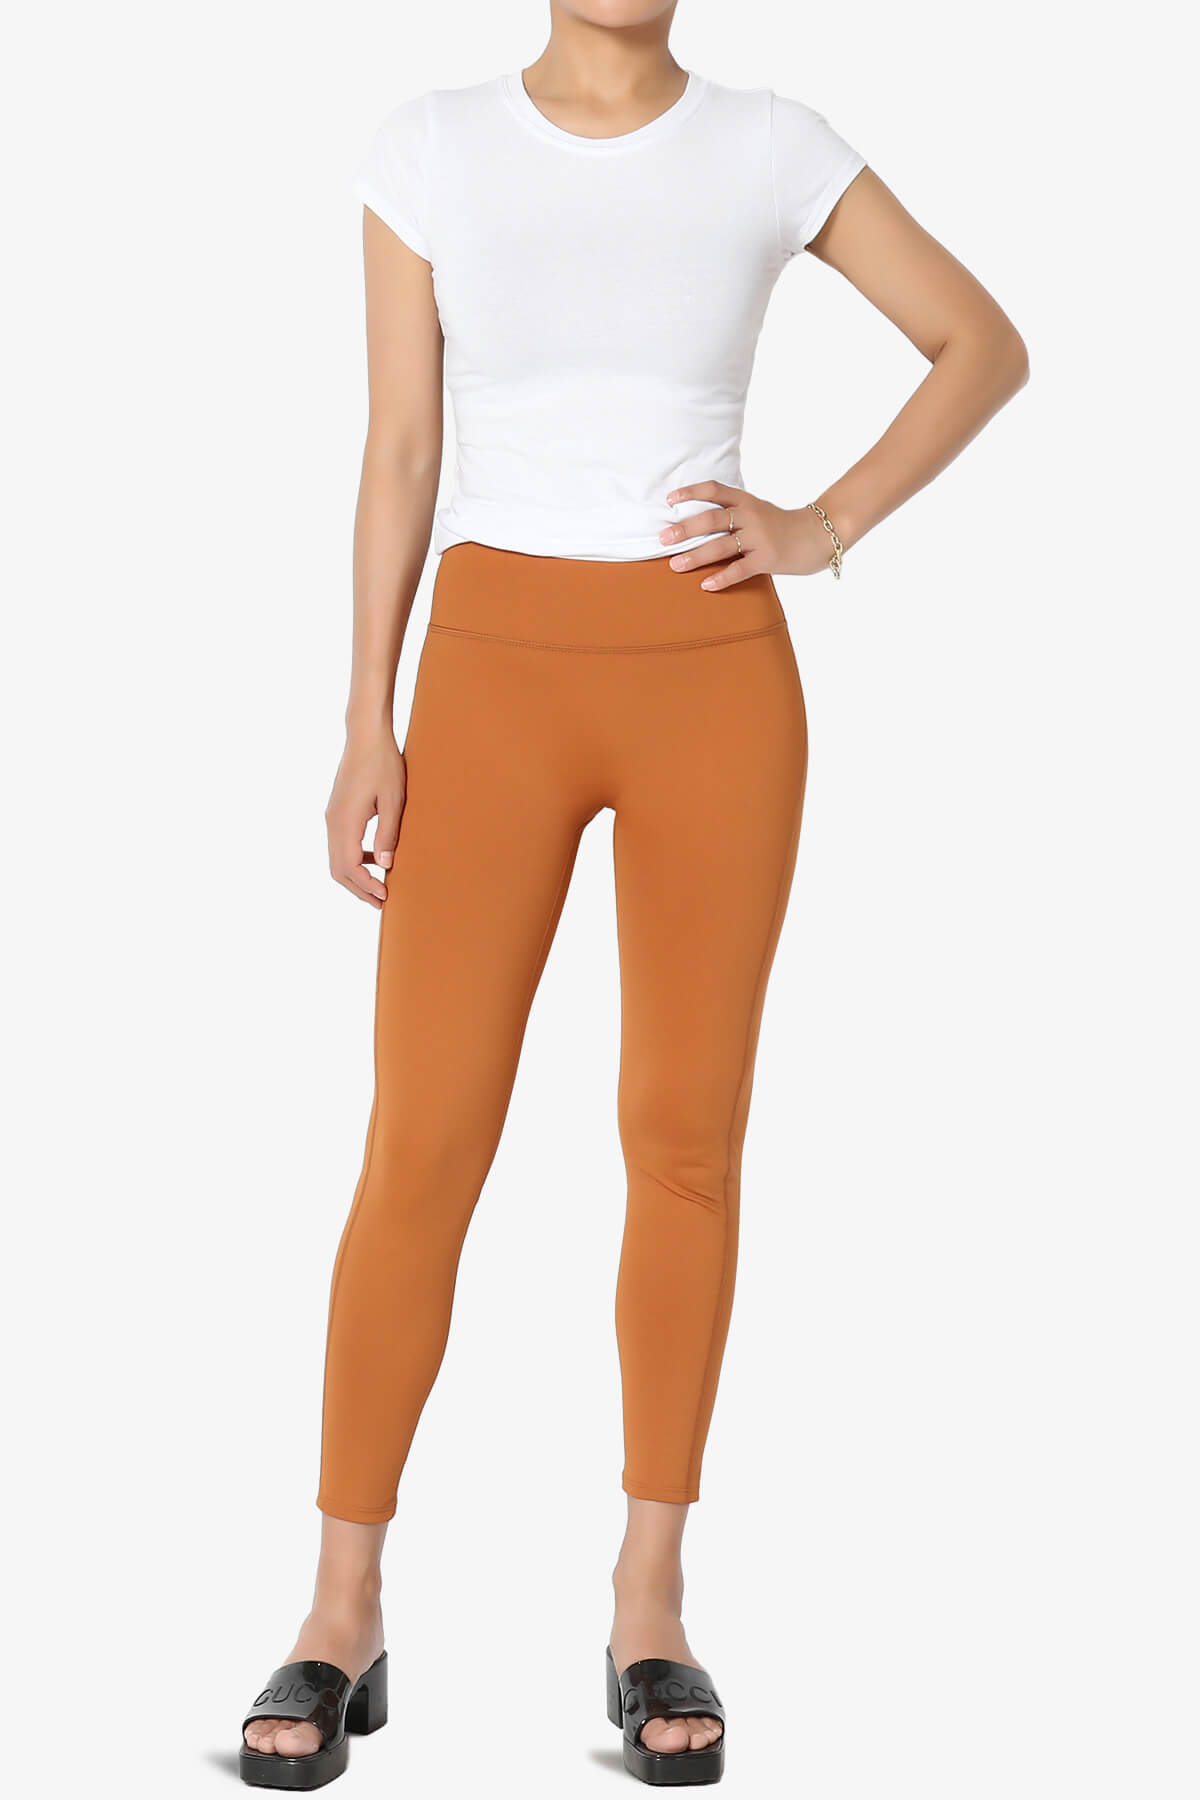 Load image into Gallery viewer, Mosco Athletic Tummy Control Workout Leggings ALMOND_6
